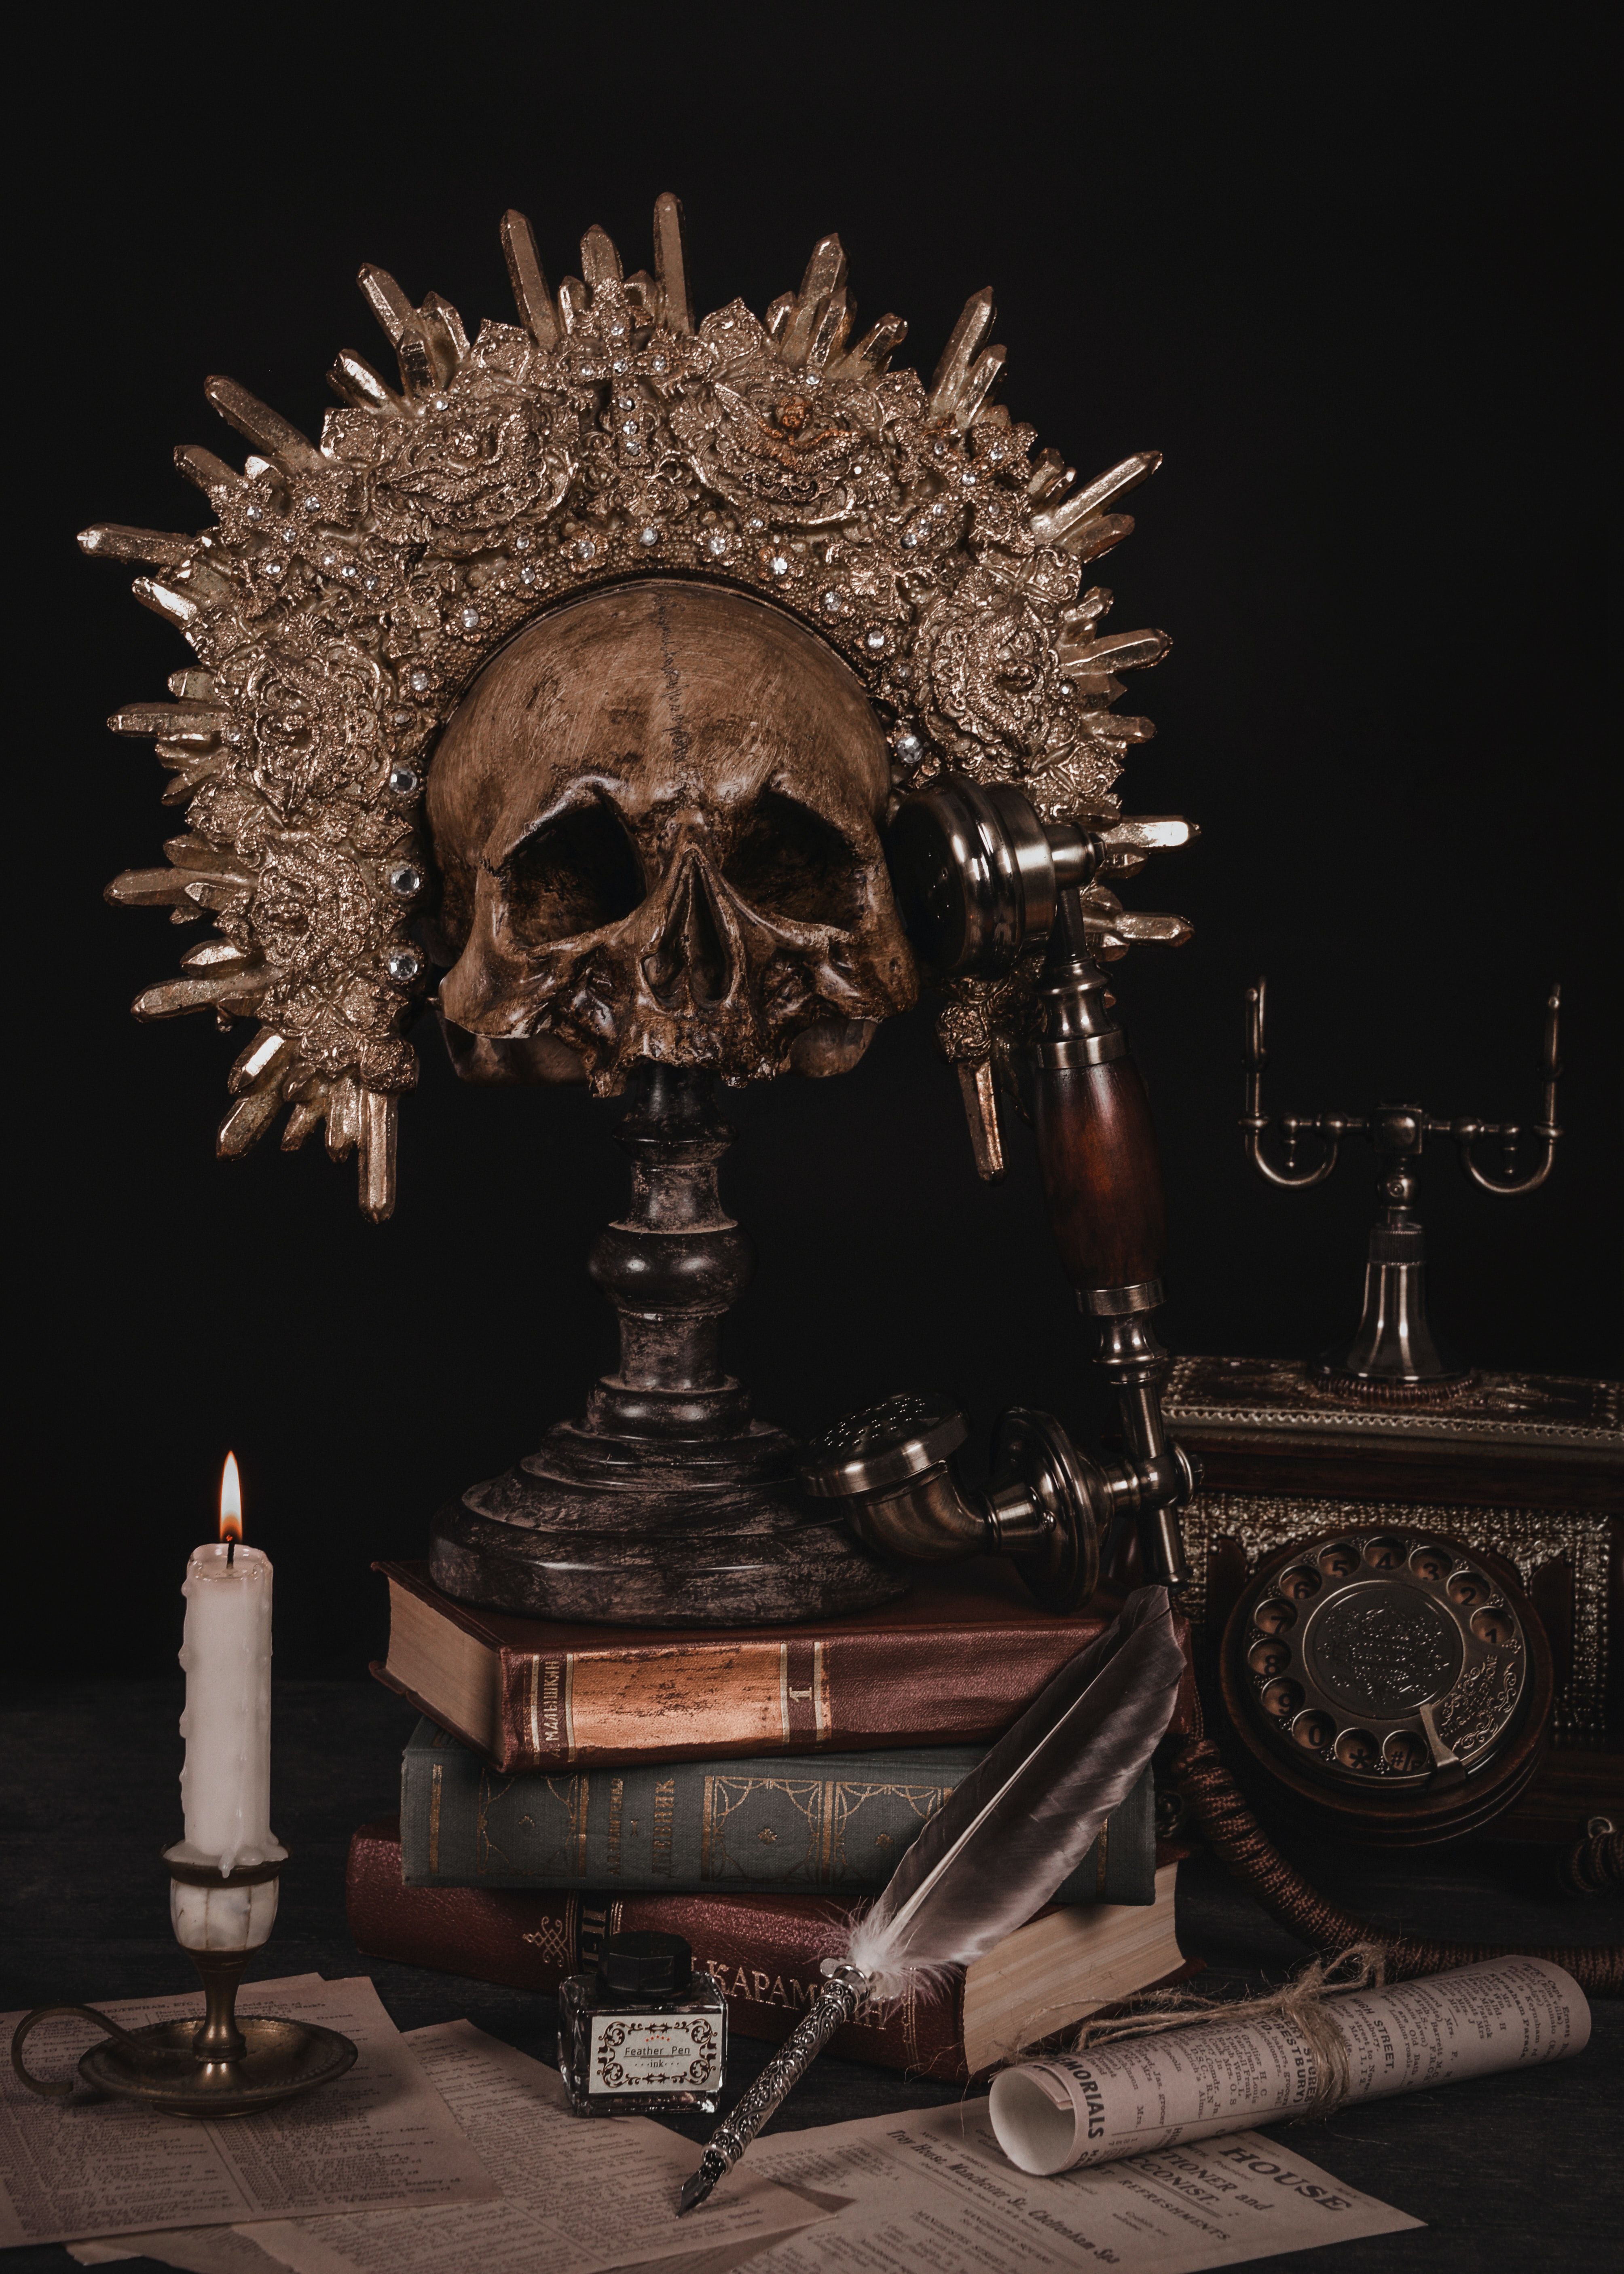 A skull and some old books - Royalcore